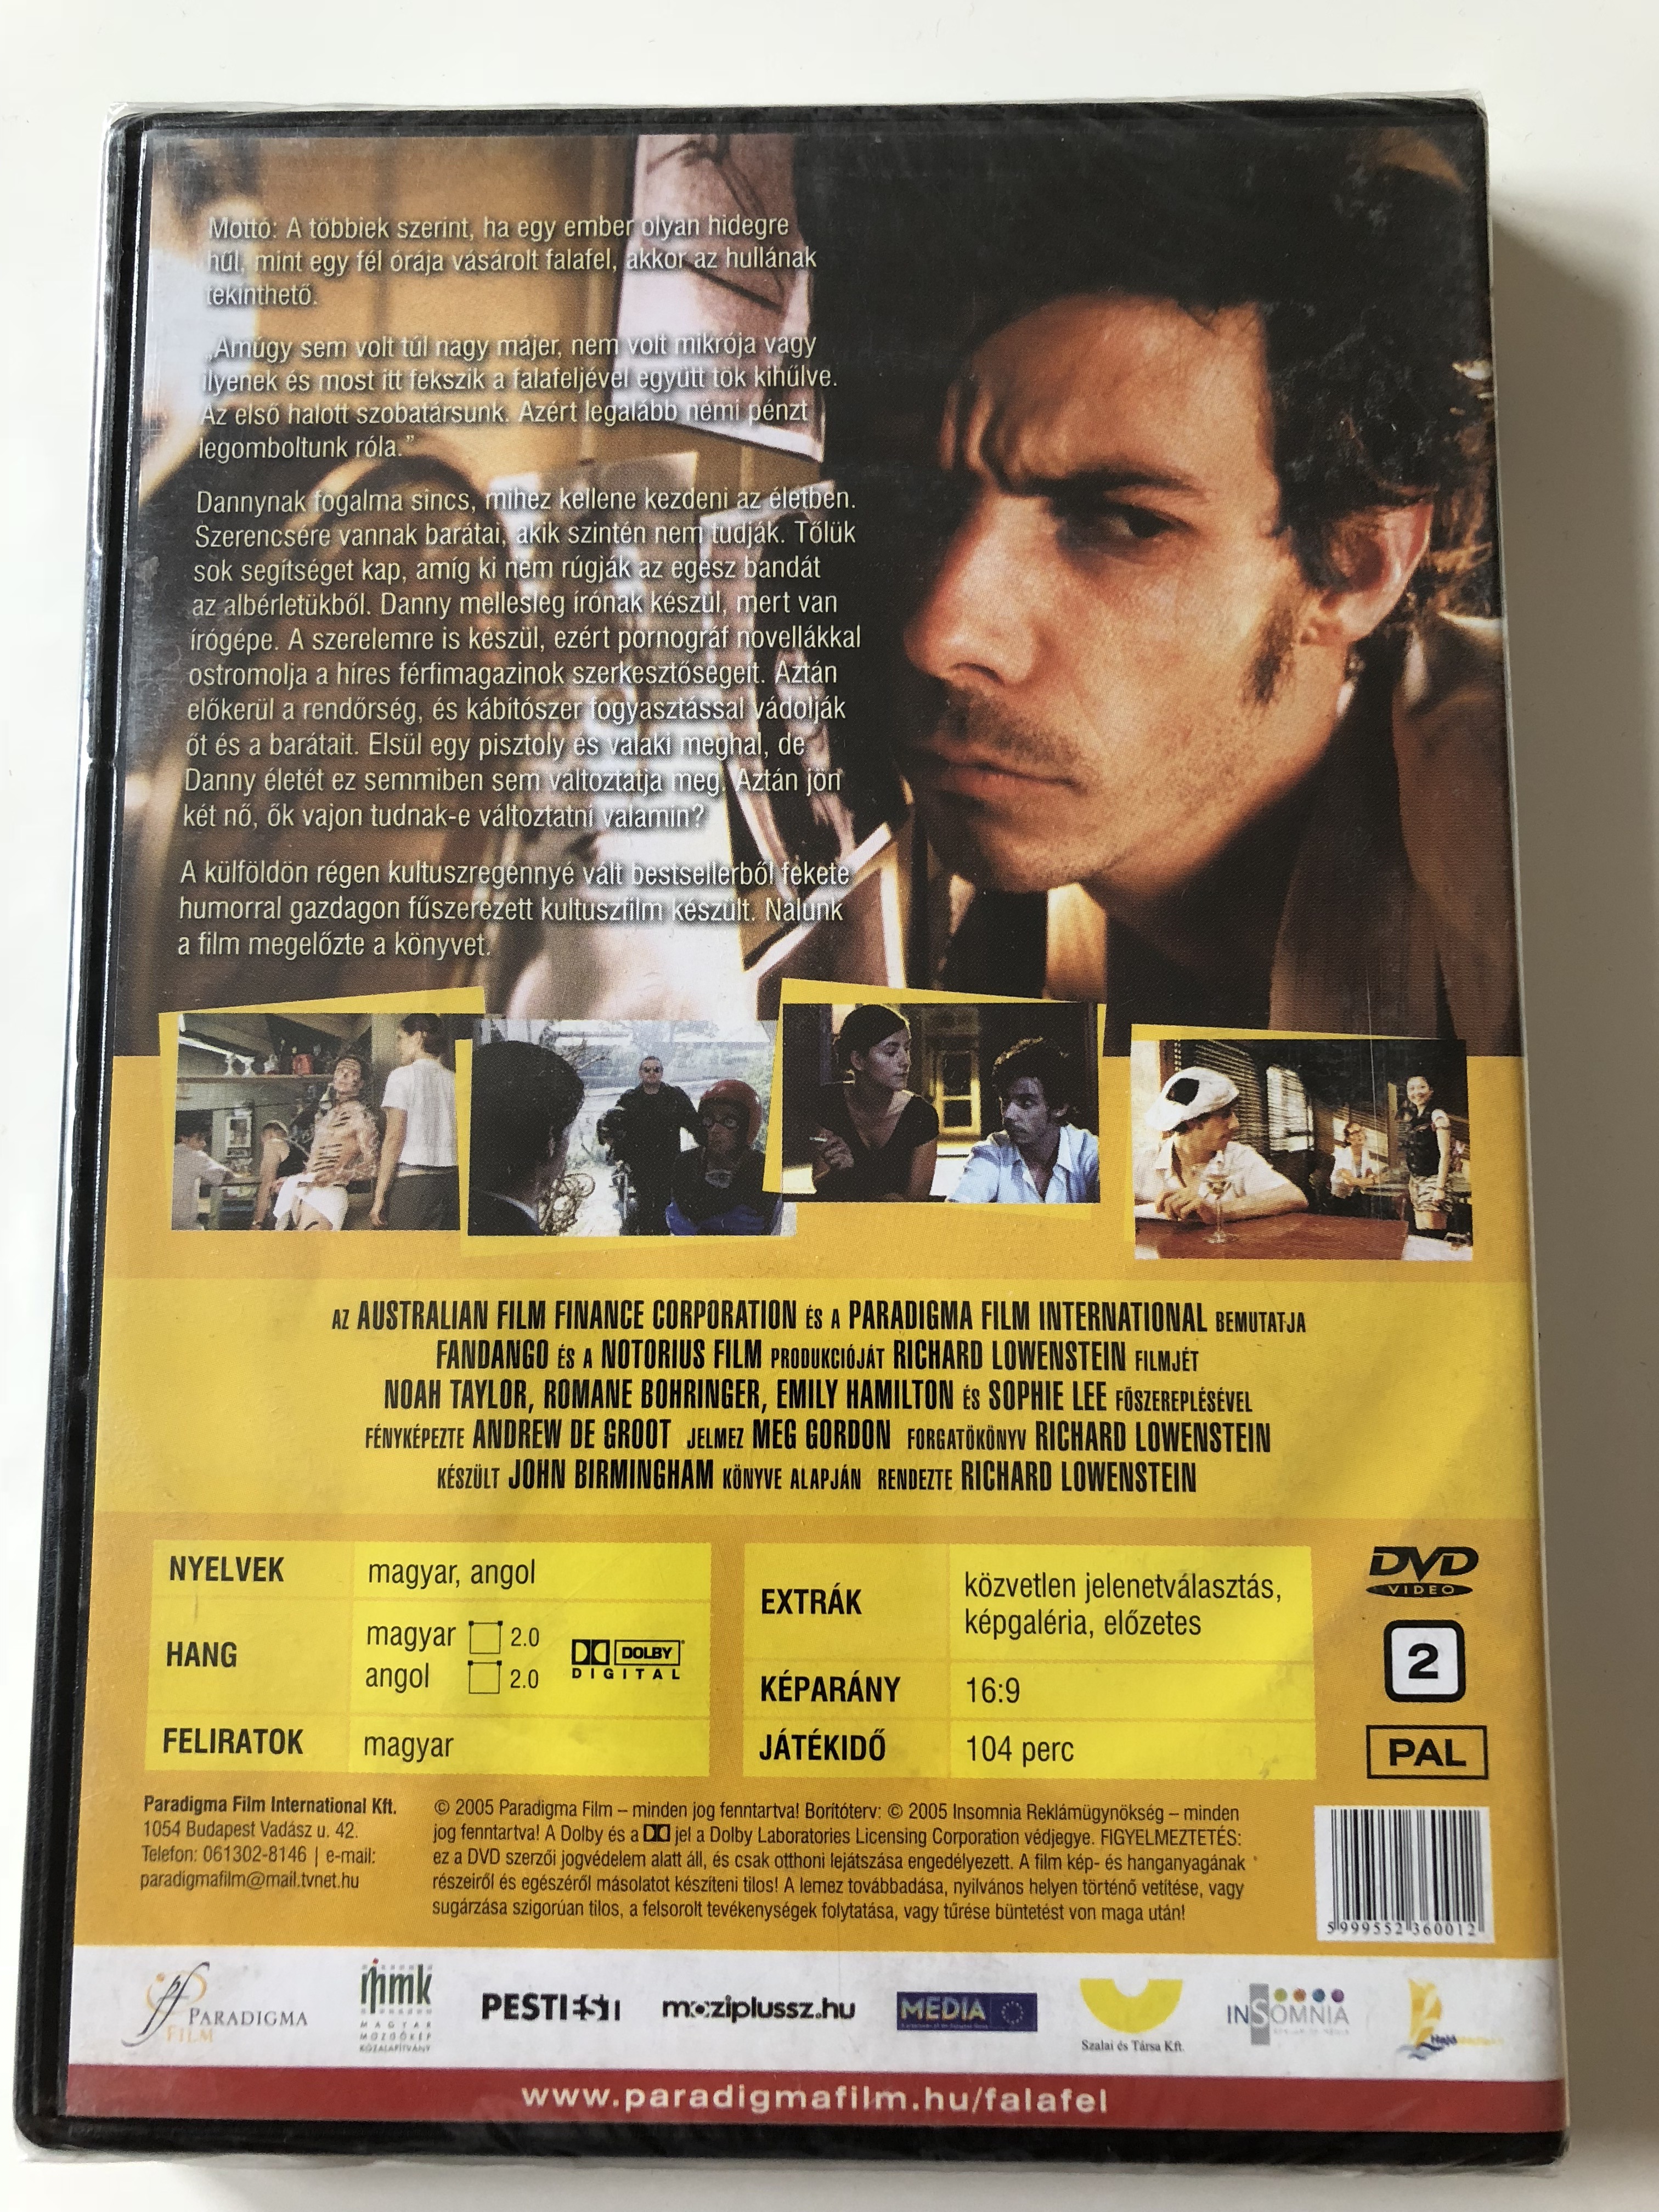 he-died-with-a-felafel-in-his-hand-dvd-2001-egy-hulla-egy-falafel-s-a-t-bbiek...-directed-by-richard-lowenstein-starring-noah-taylor-emily-hamilton-sophie-lee-2-.jpg